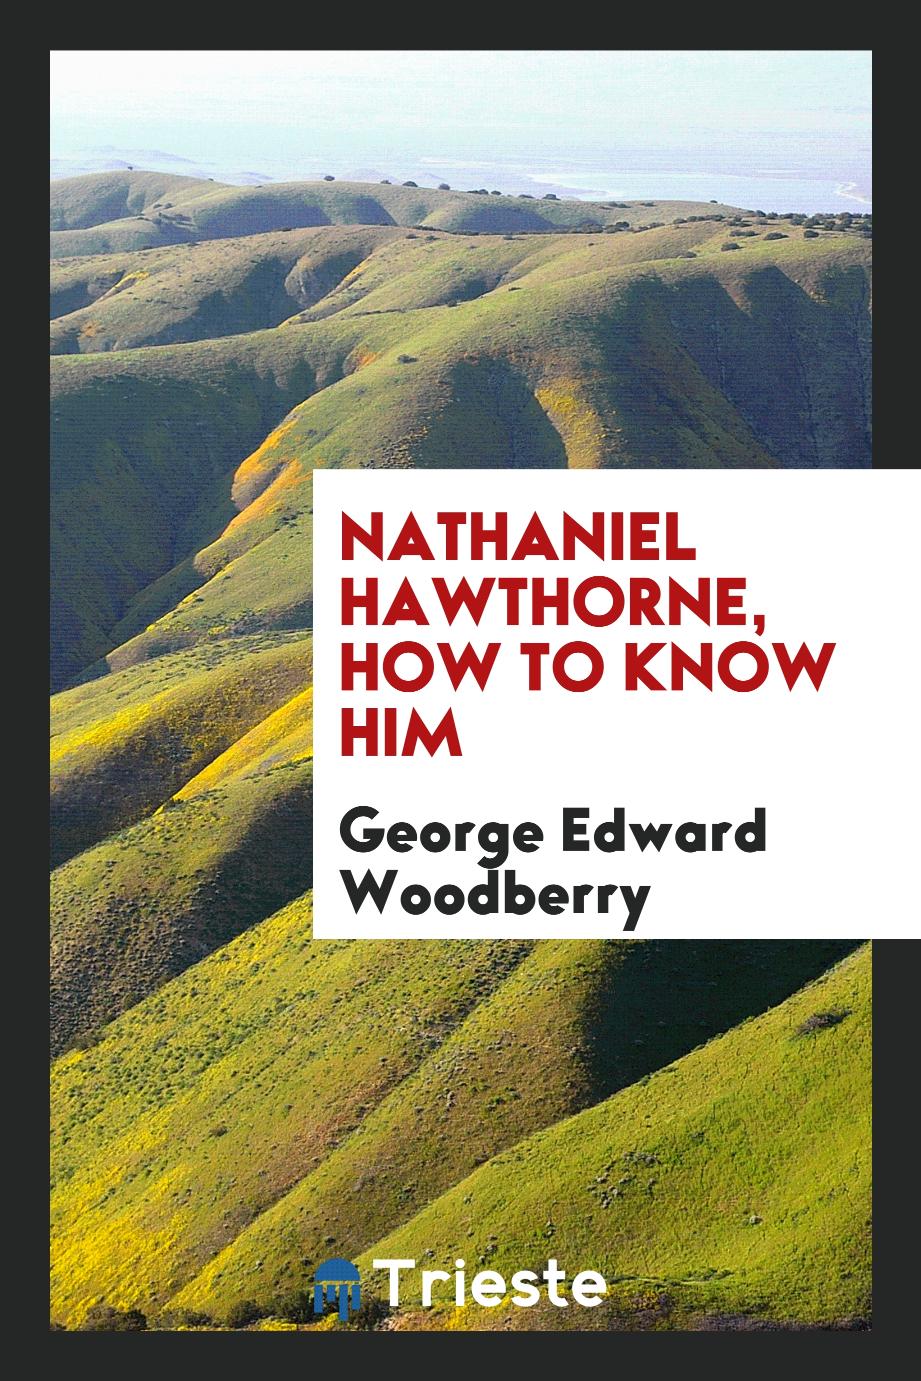 Nathaniel Hawthorne, how to know him